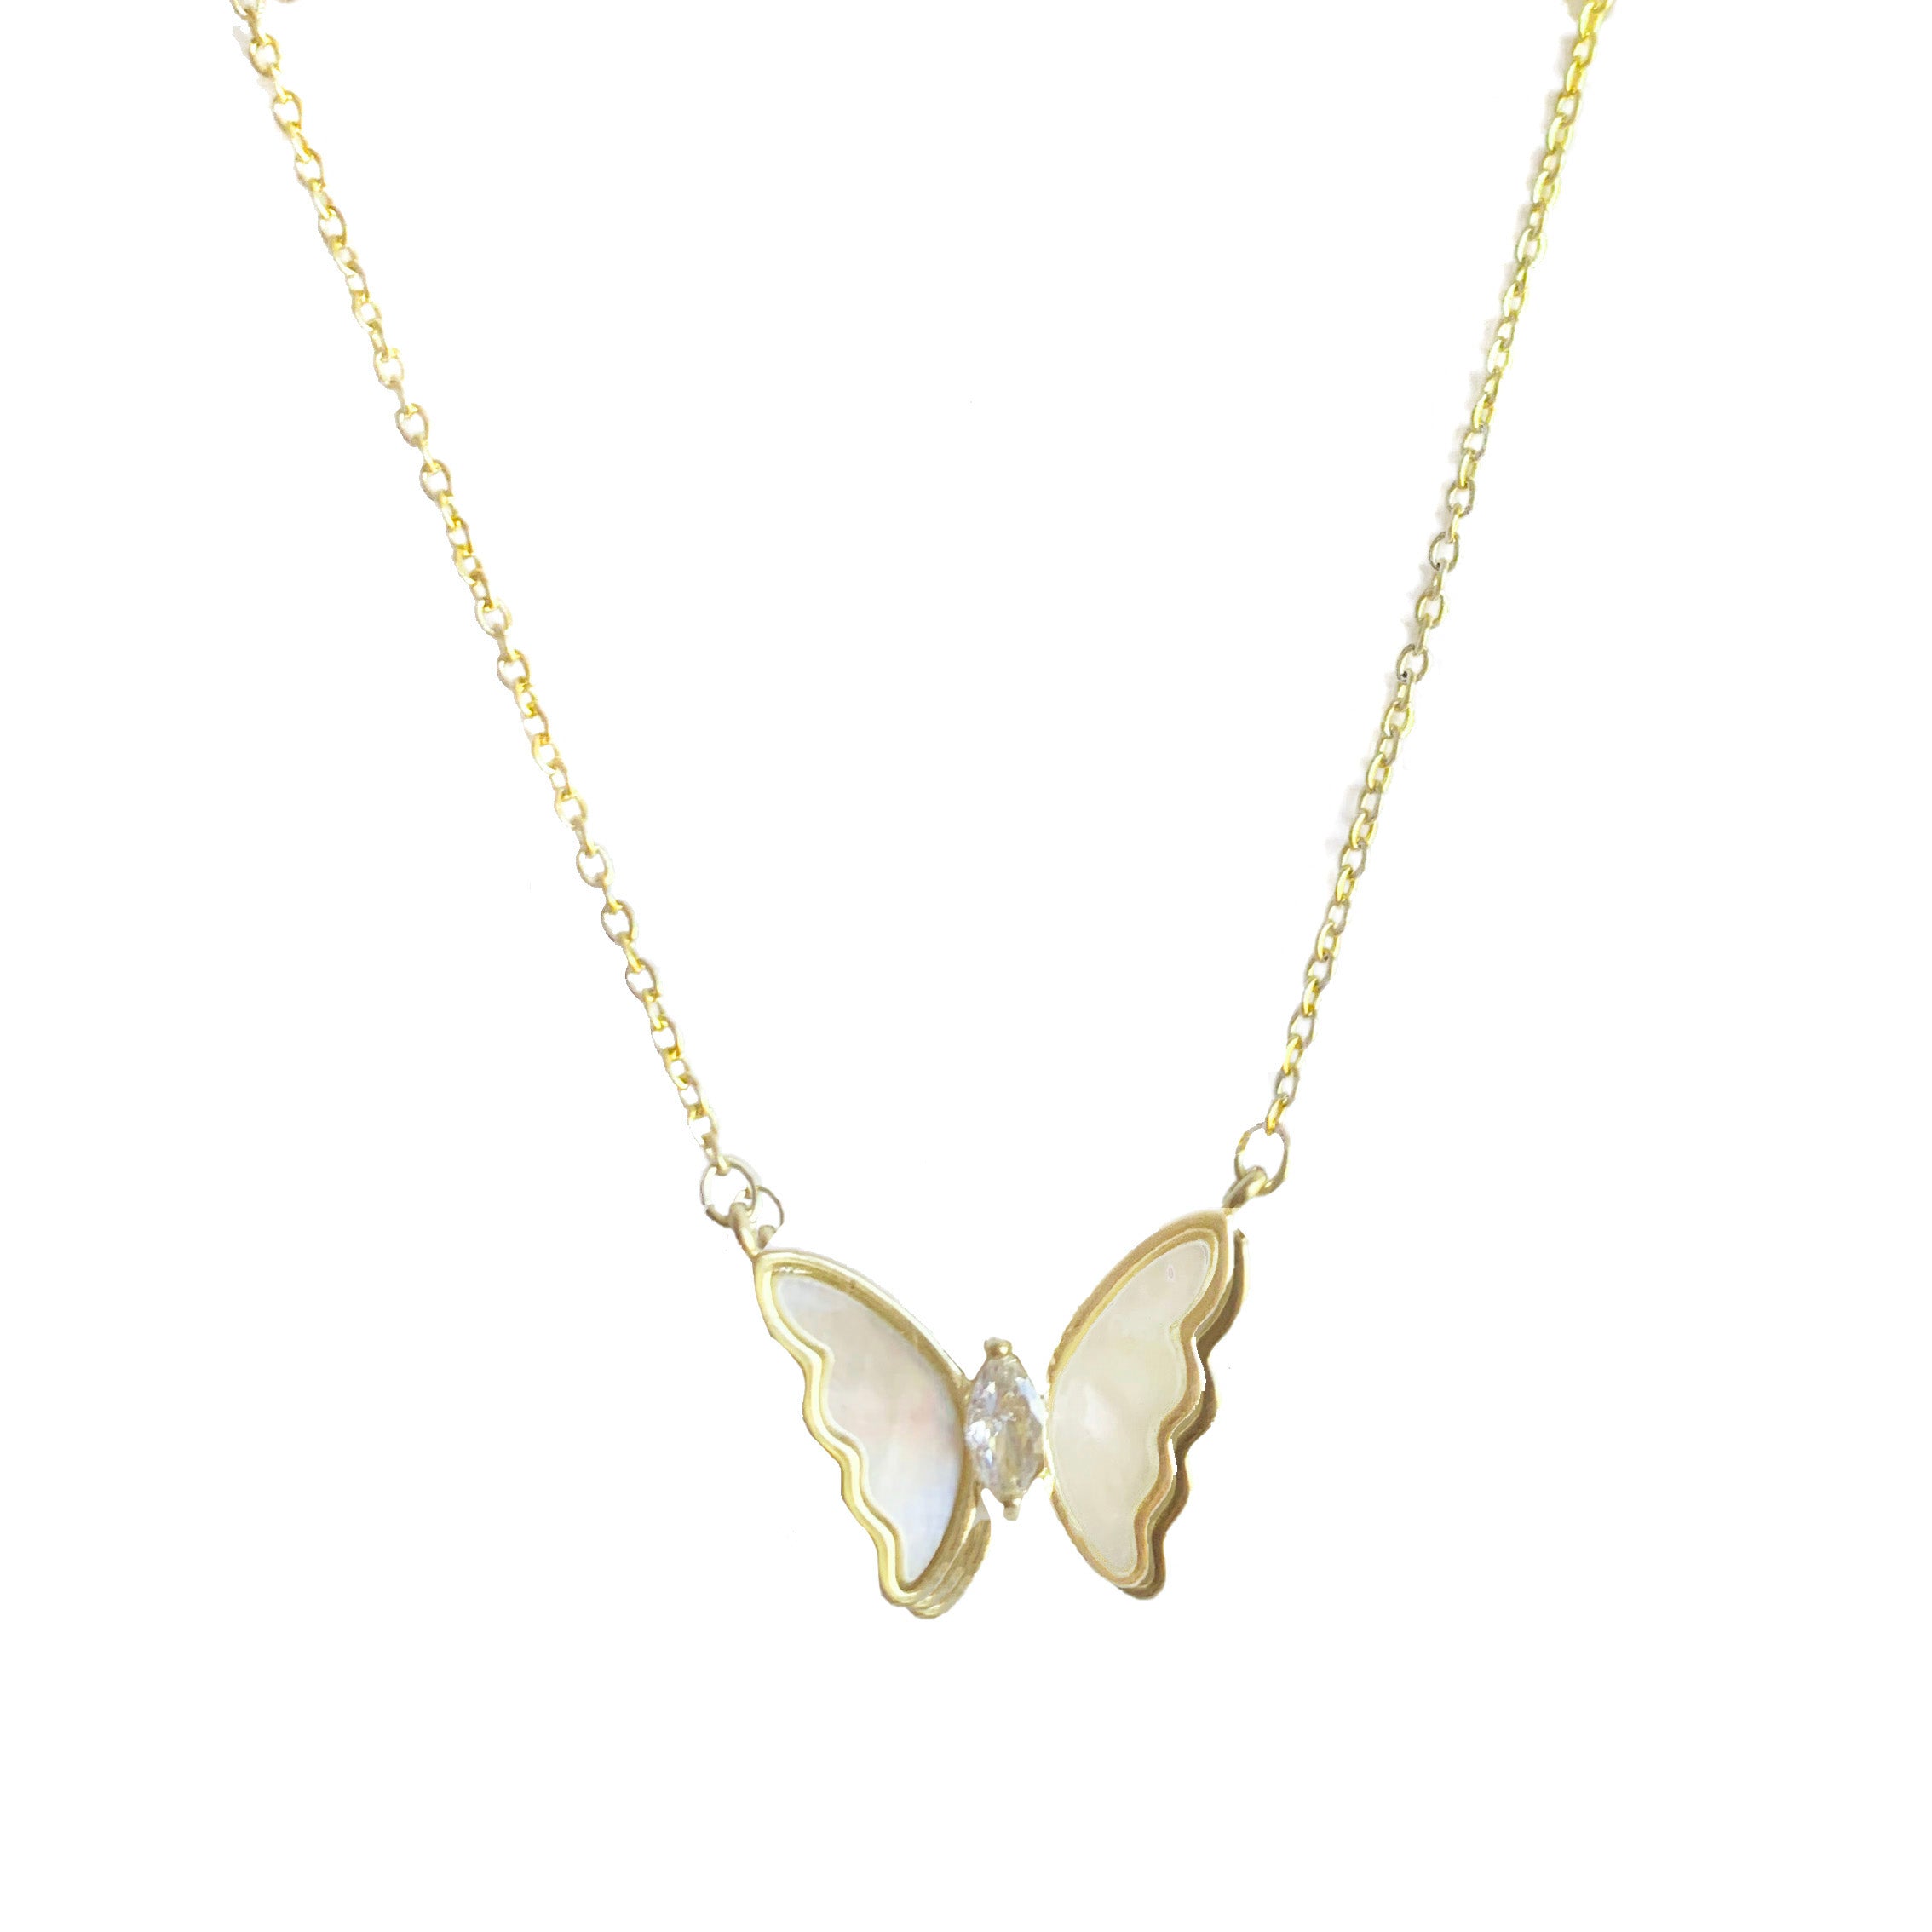 Butterfly Necklace Pendant Necklace Faux PealGold Chain with Gift Pouch